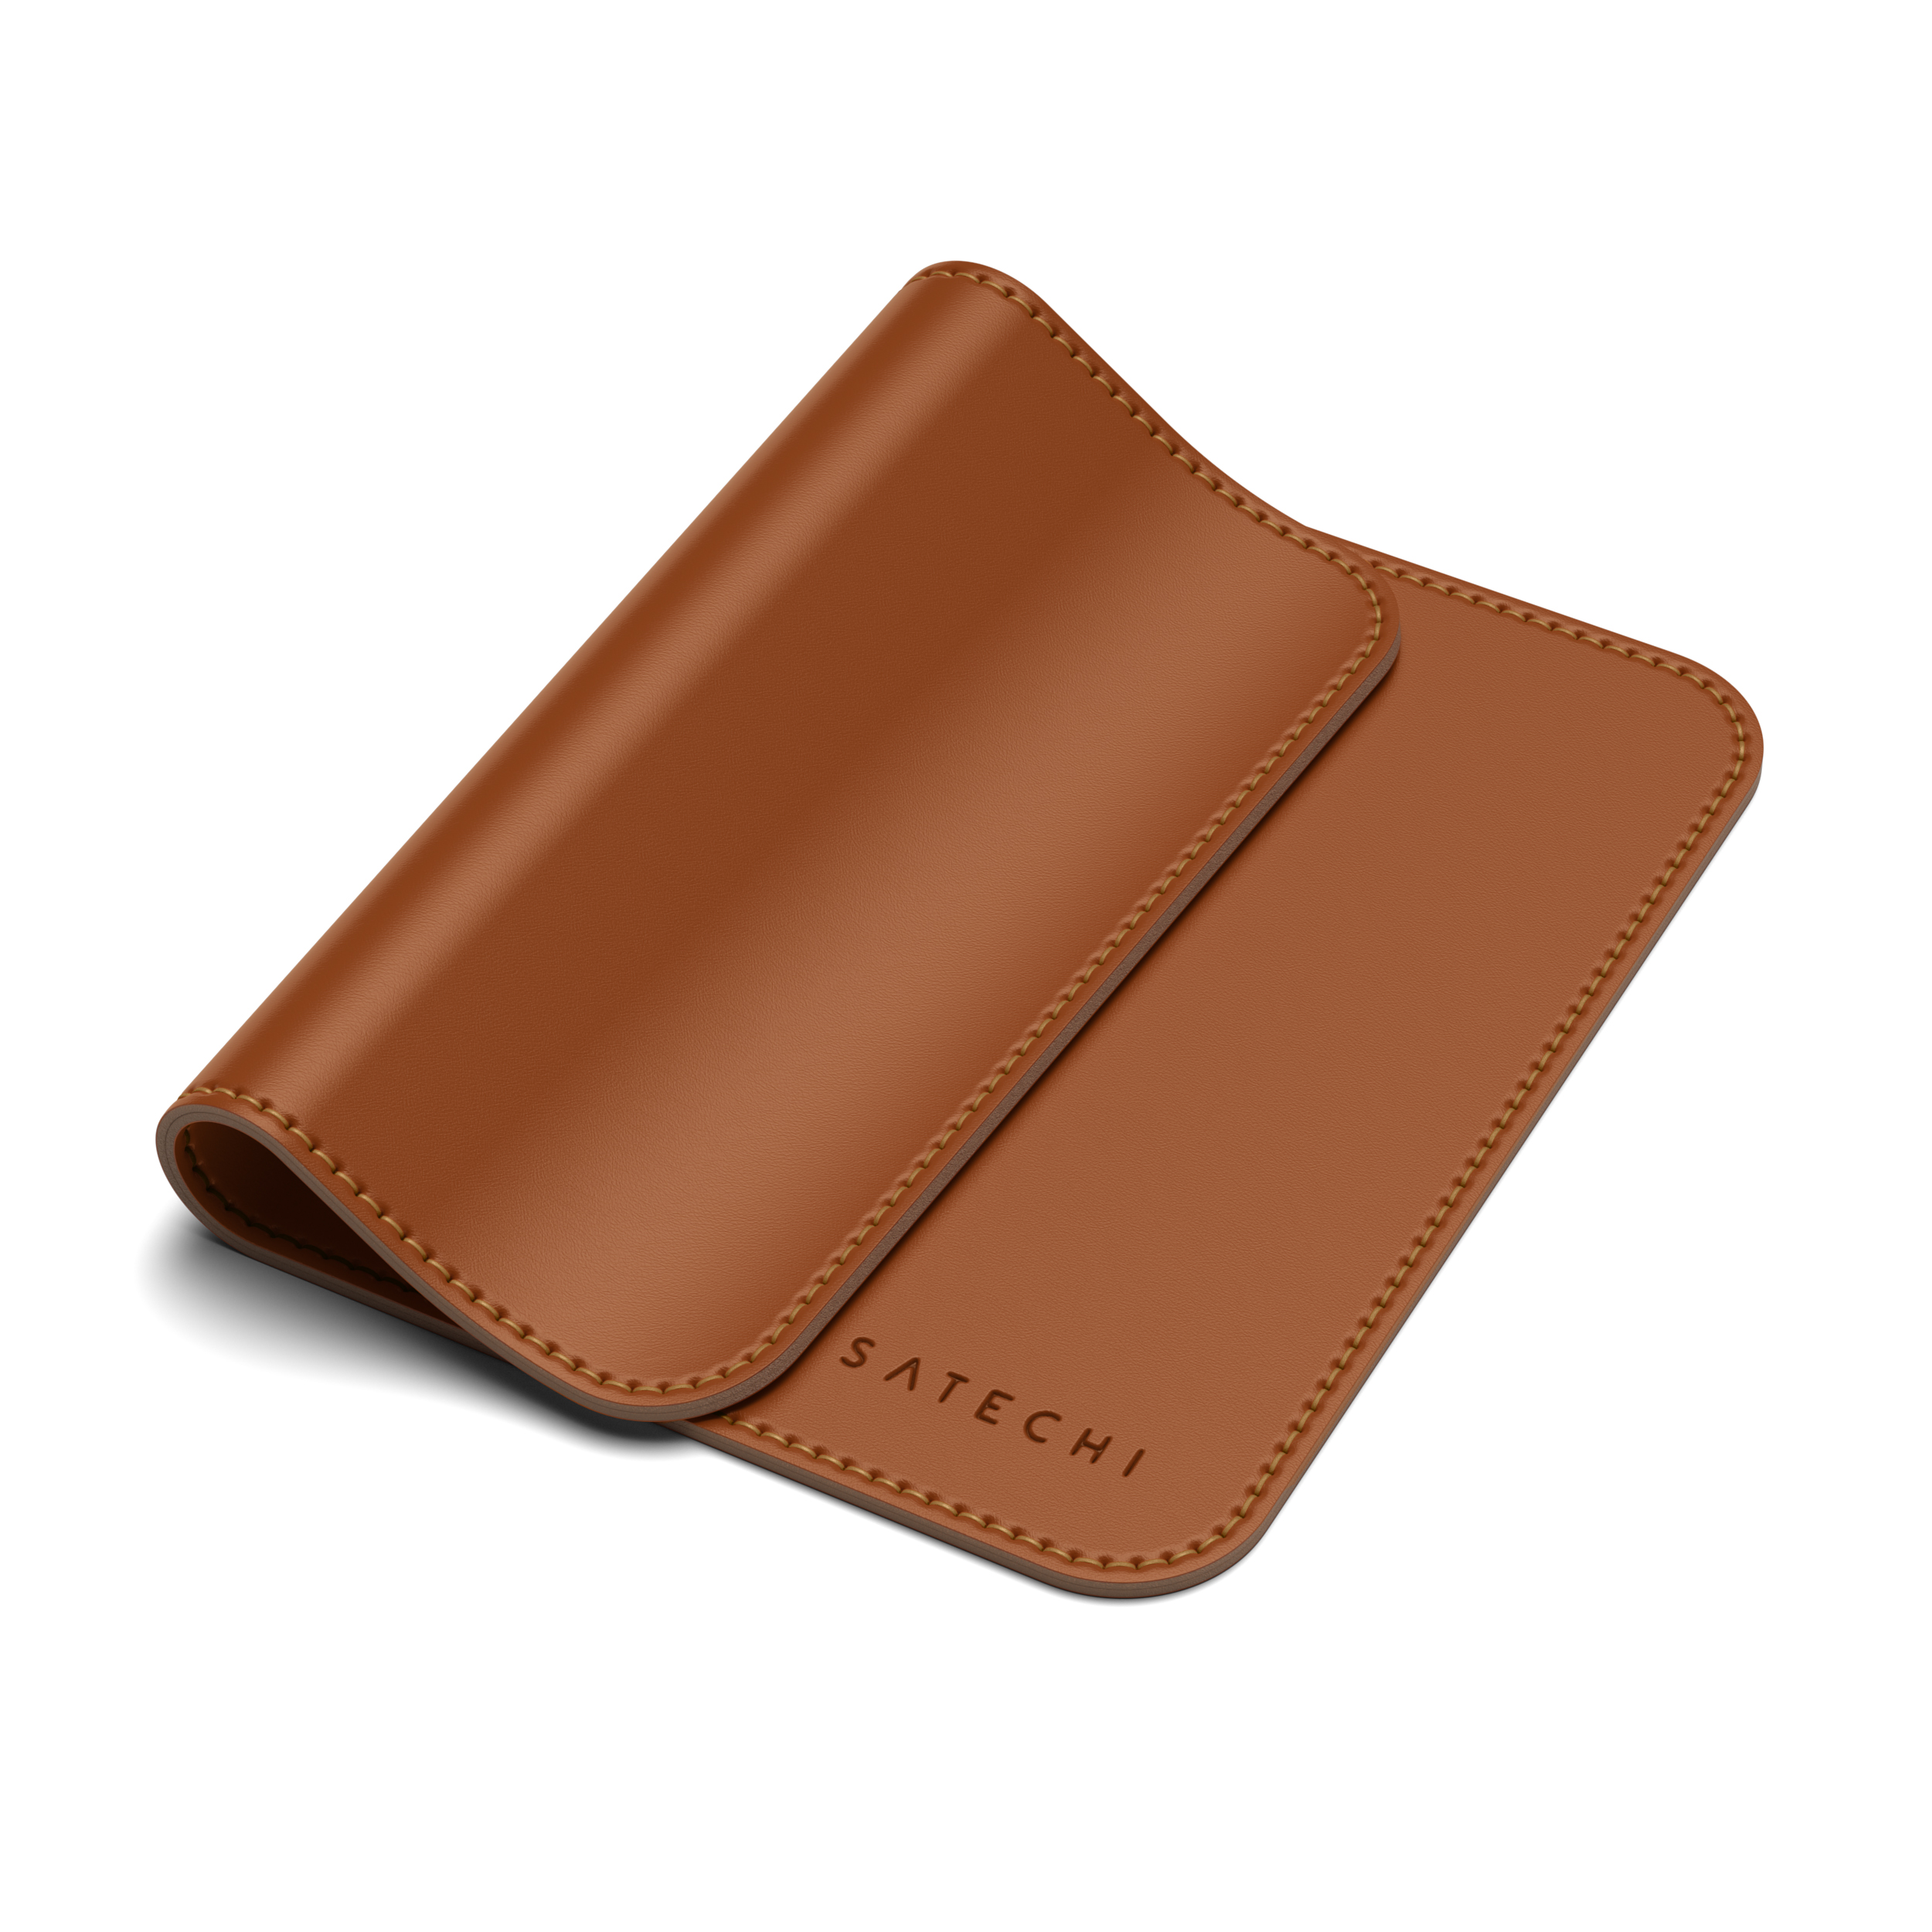 (19 Mousepad Eco-Leather 24,89 Brown SATECHI x cm Pad cm) Mouse -